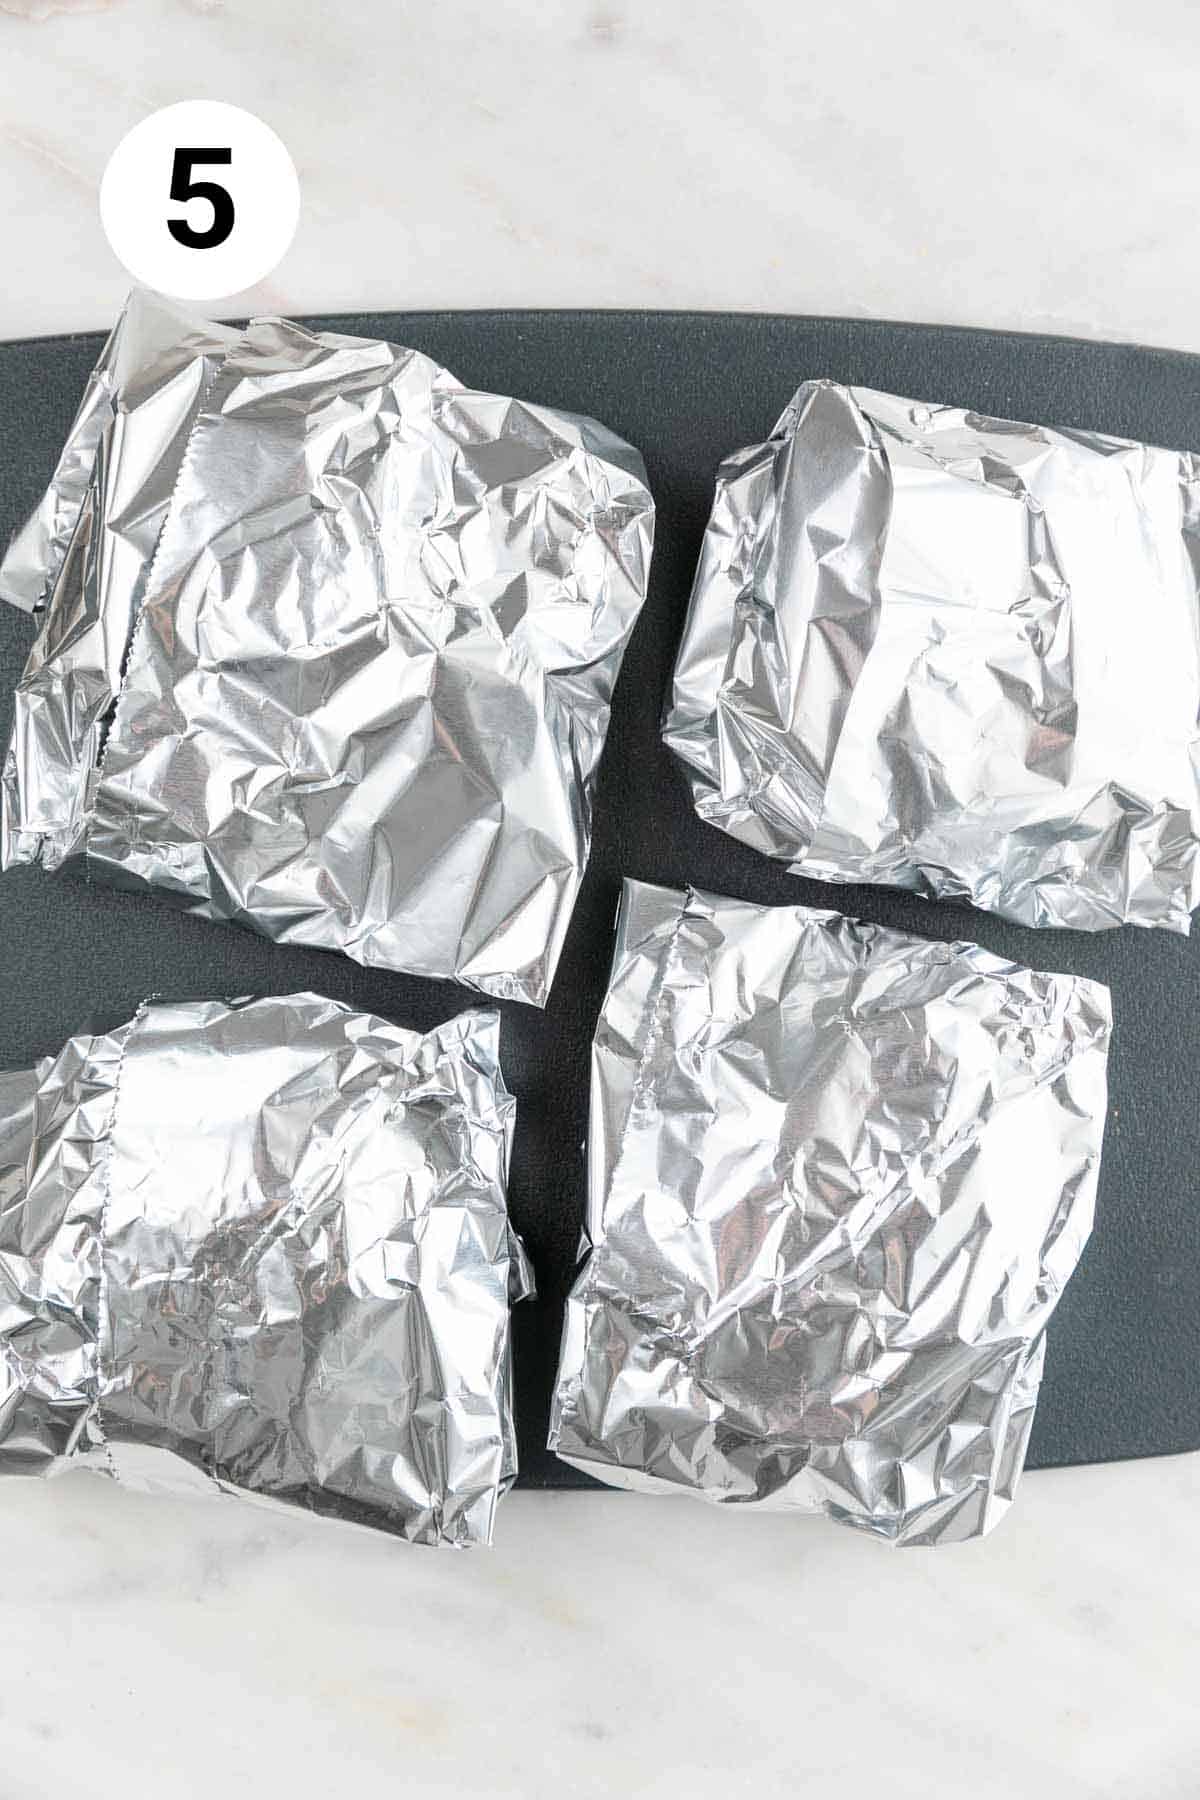 The 4 pieces wrapped loosely in aluminum foil.